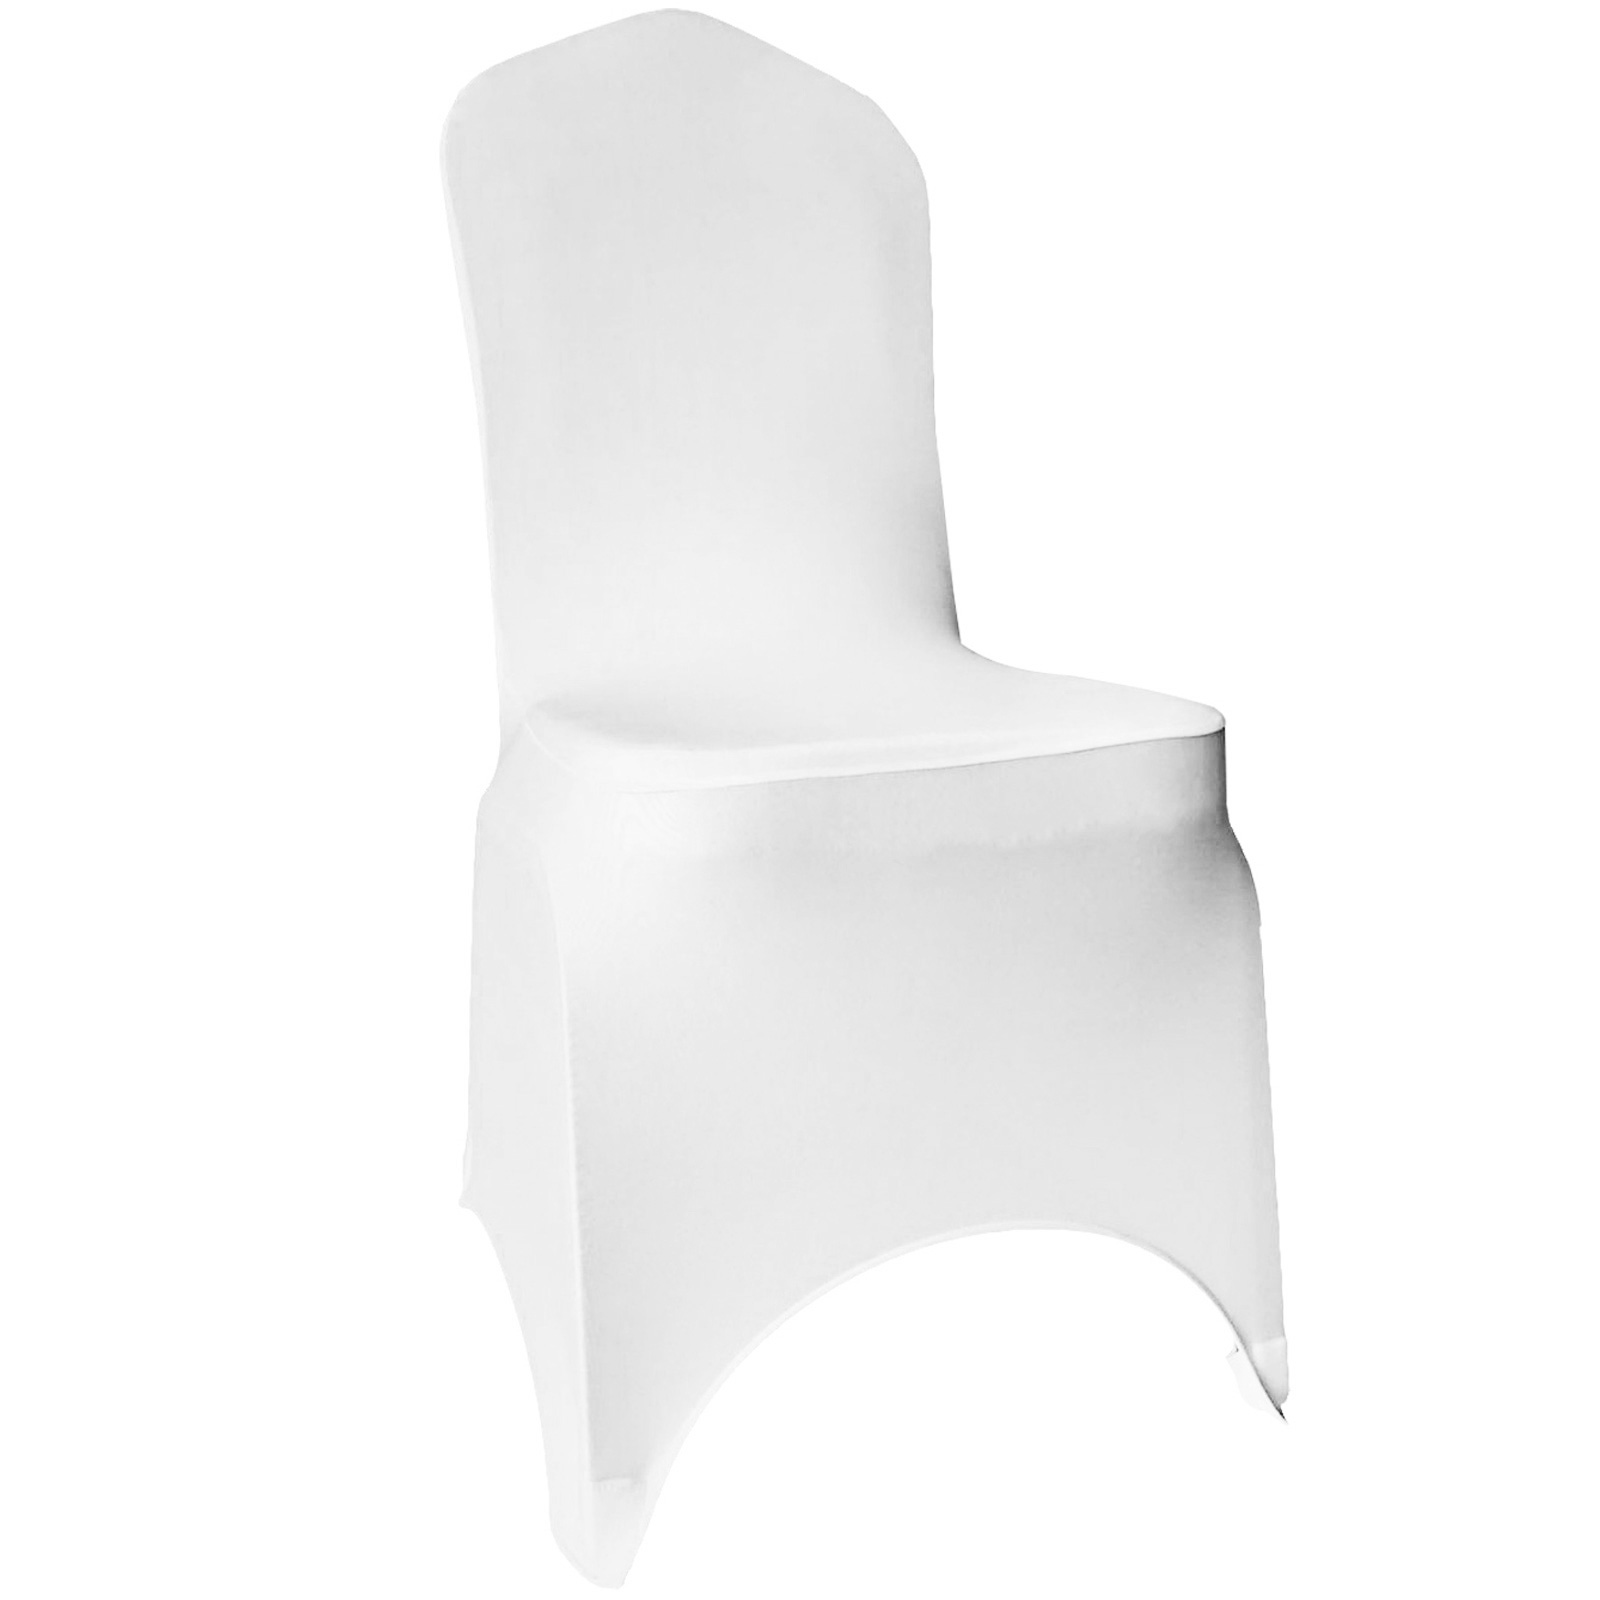 White Arched Front/ Flat Front Covers 1-200pcs Spandex Lycra Chair Cover Wedding 